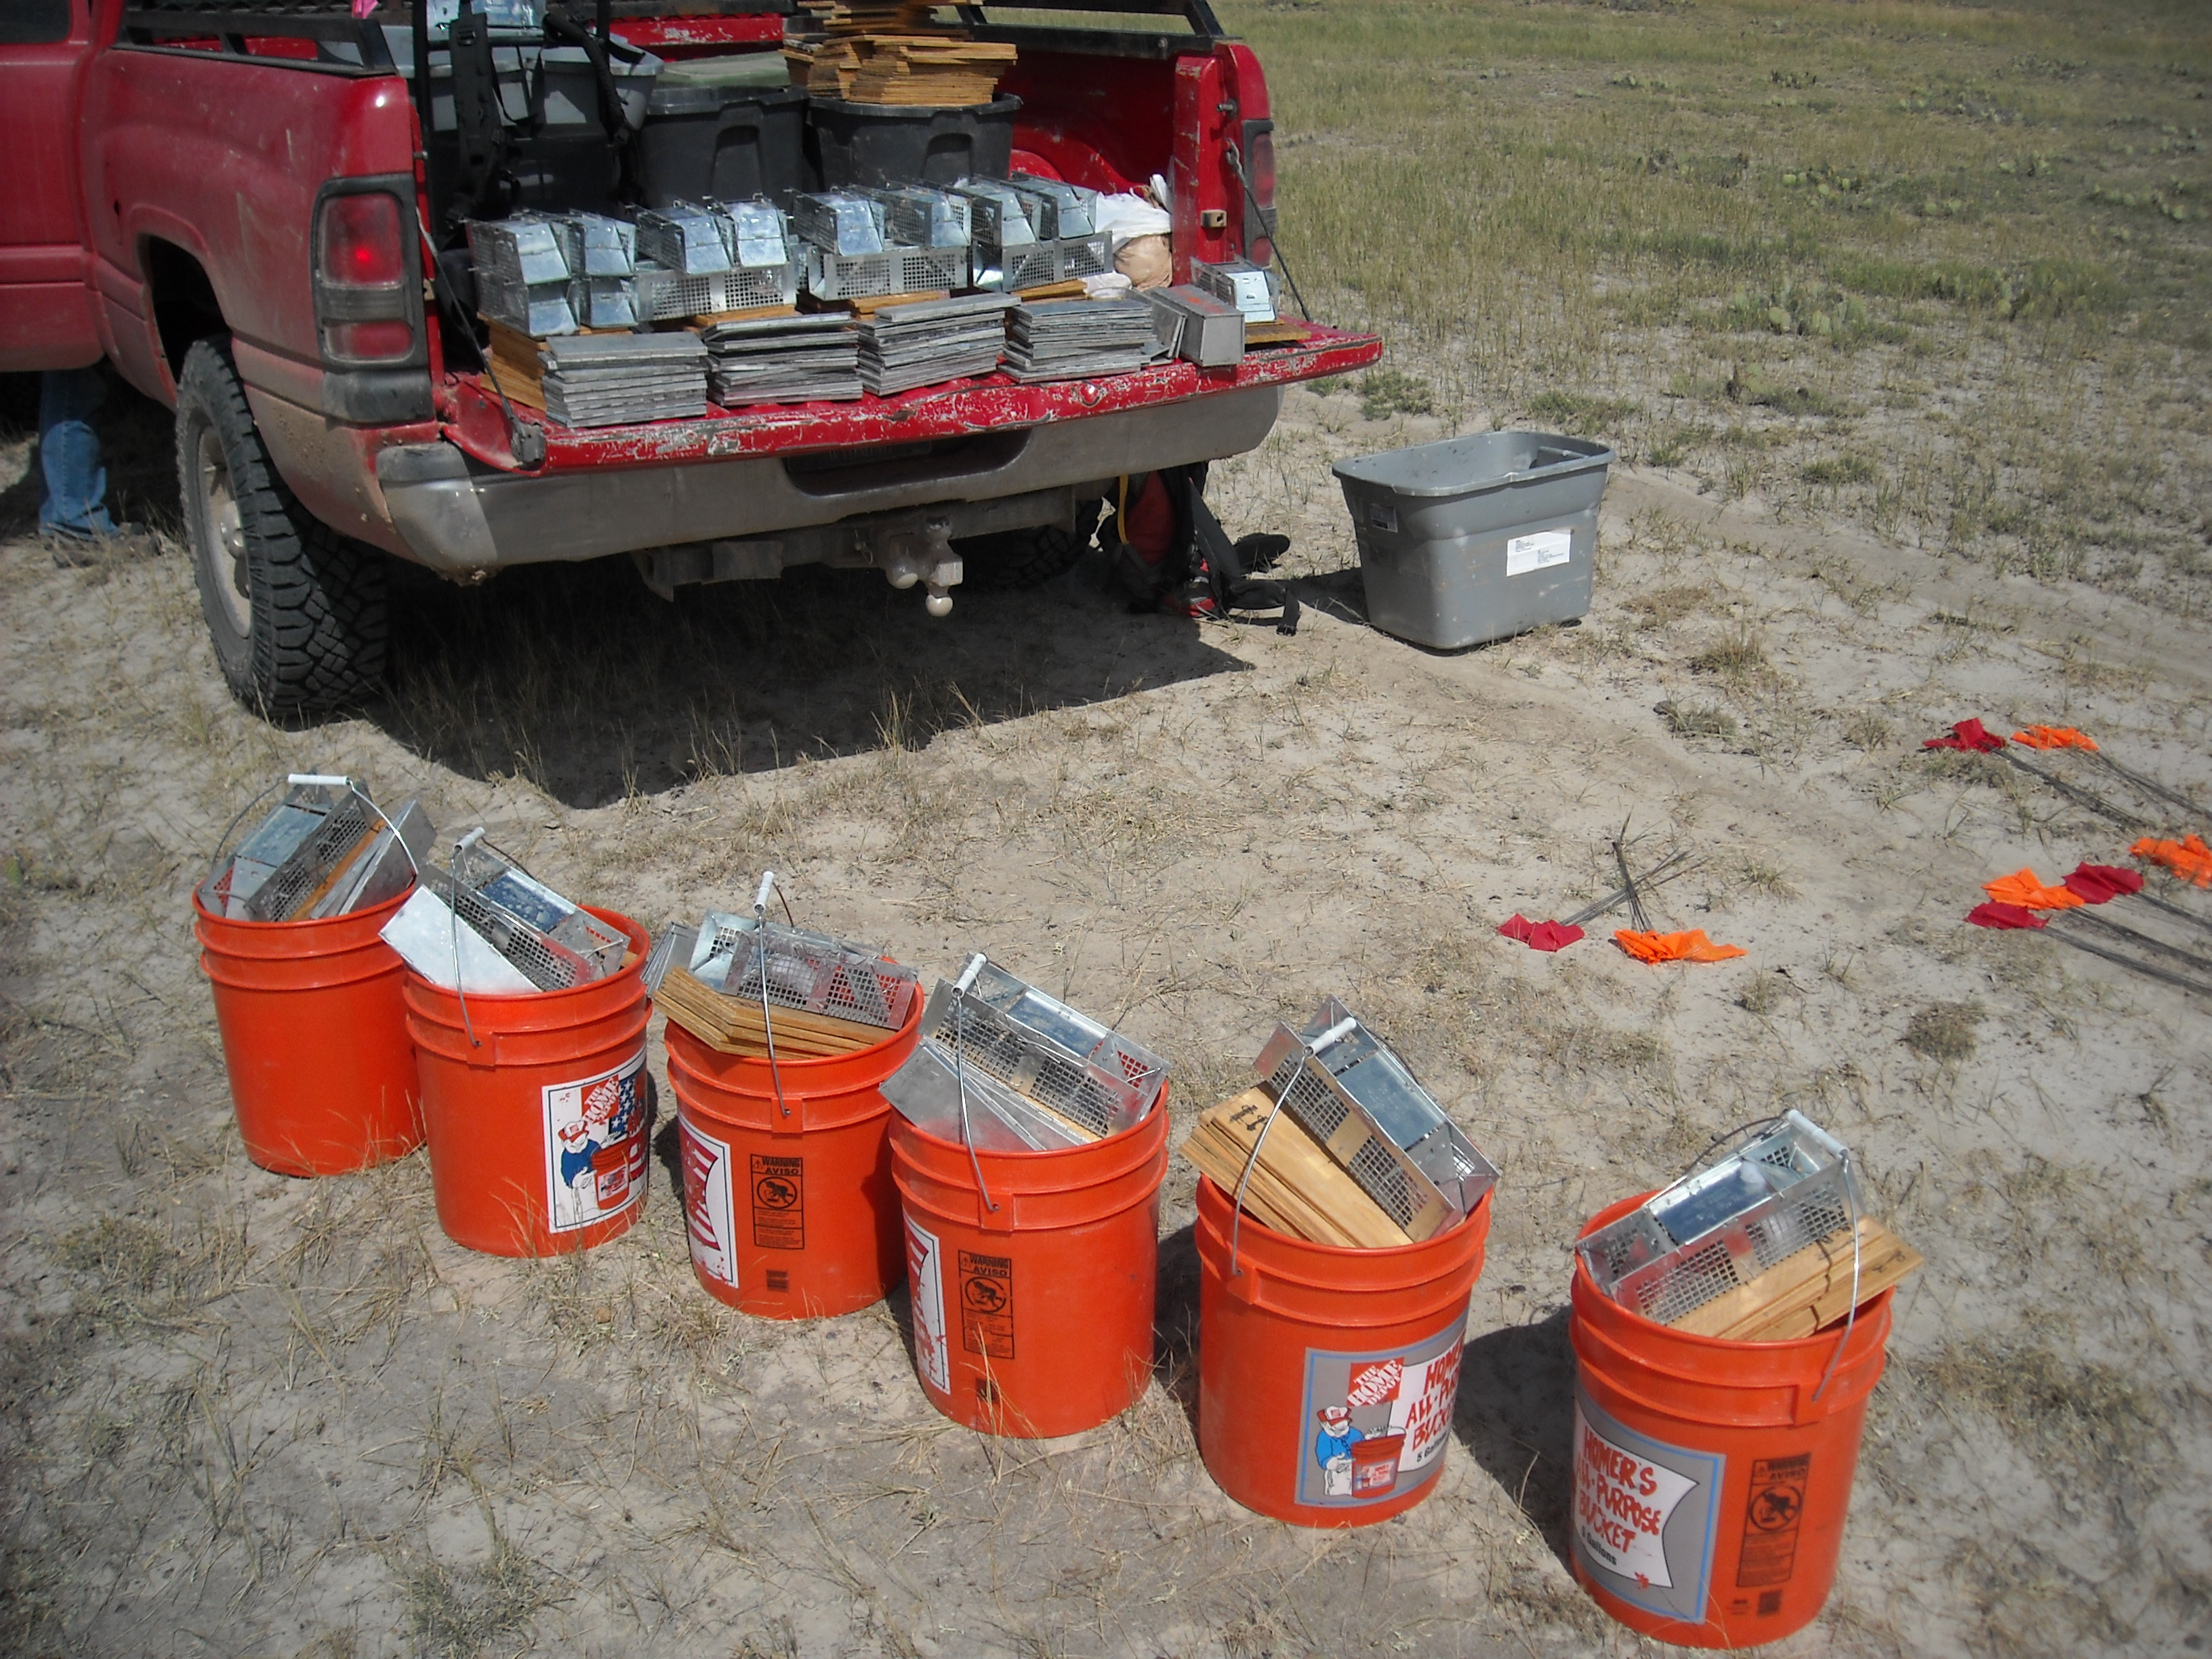 Staging small mammal traps (120 traps and coverboards per grid), Thunder Basin National Grassland, WY